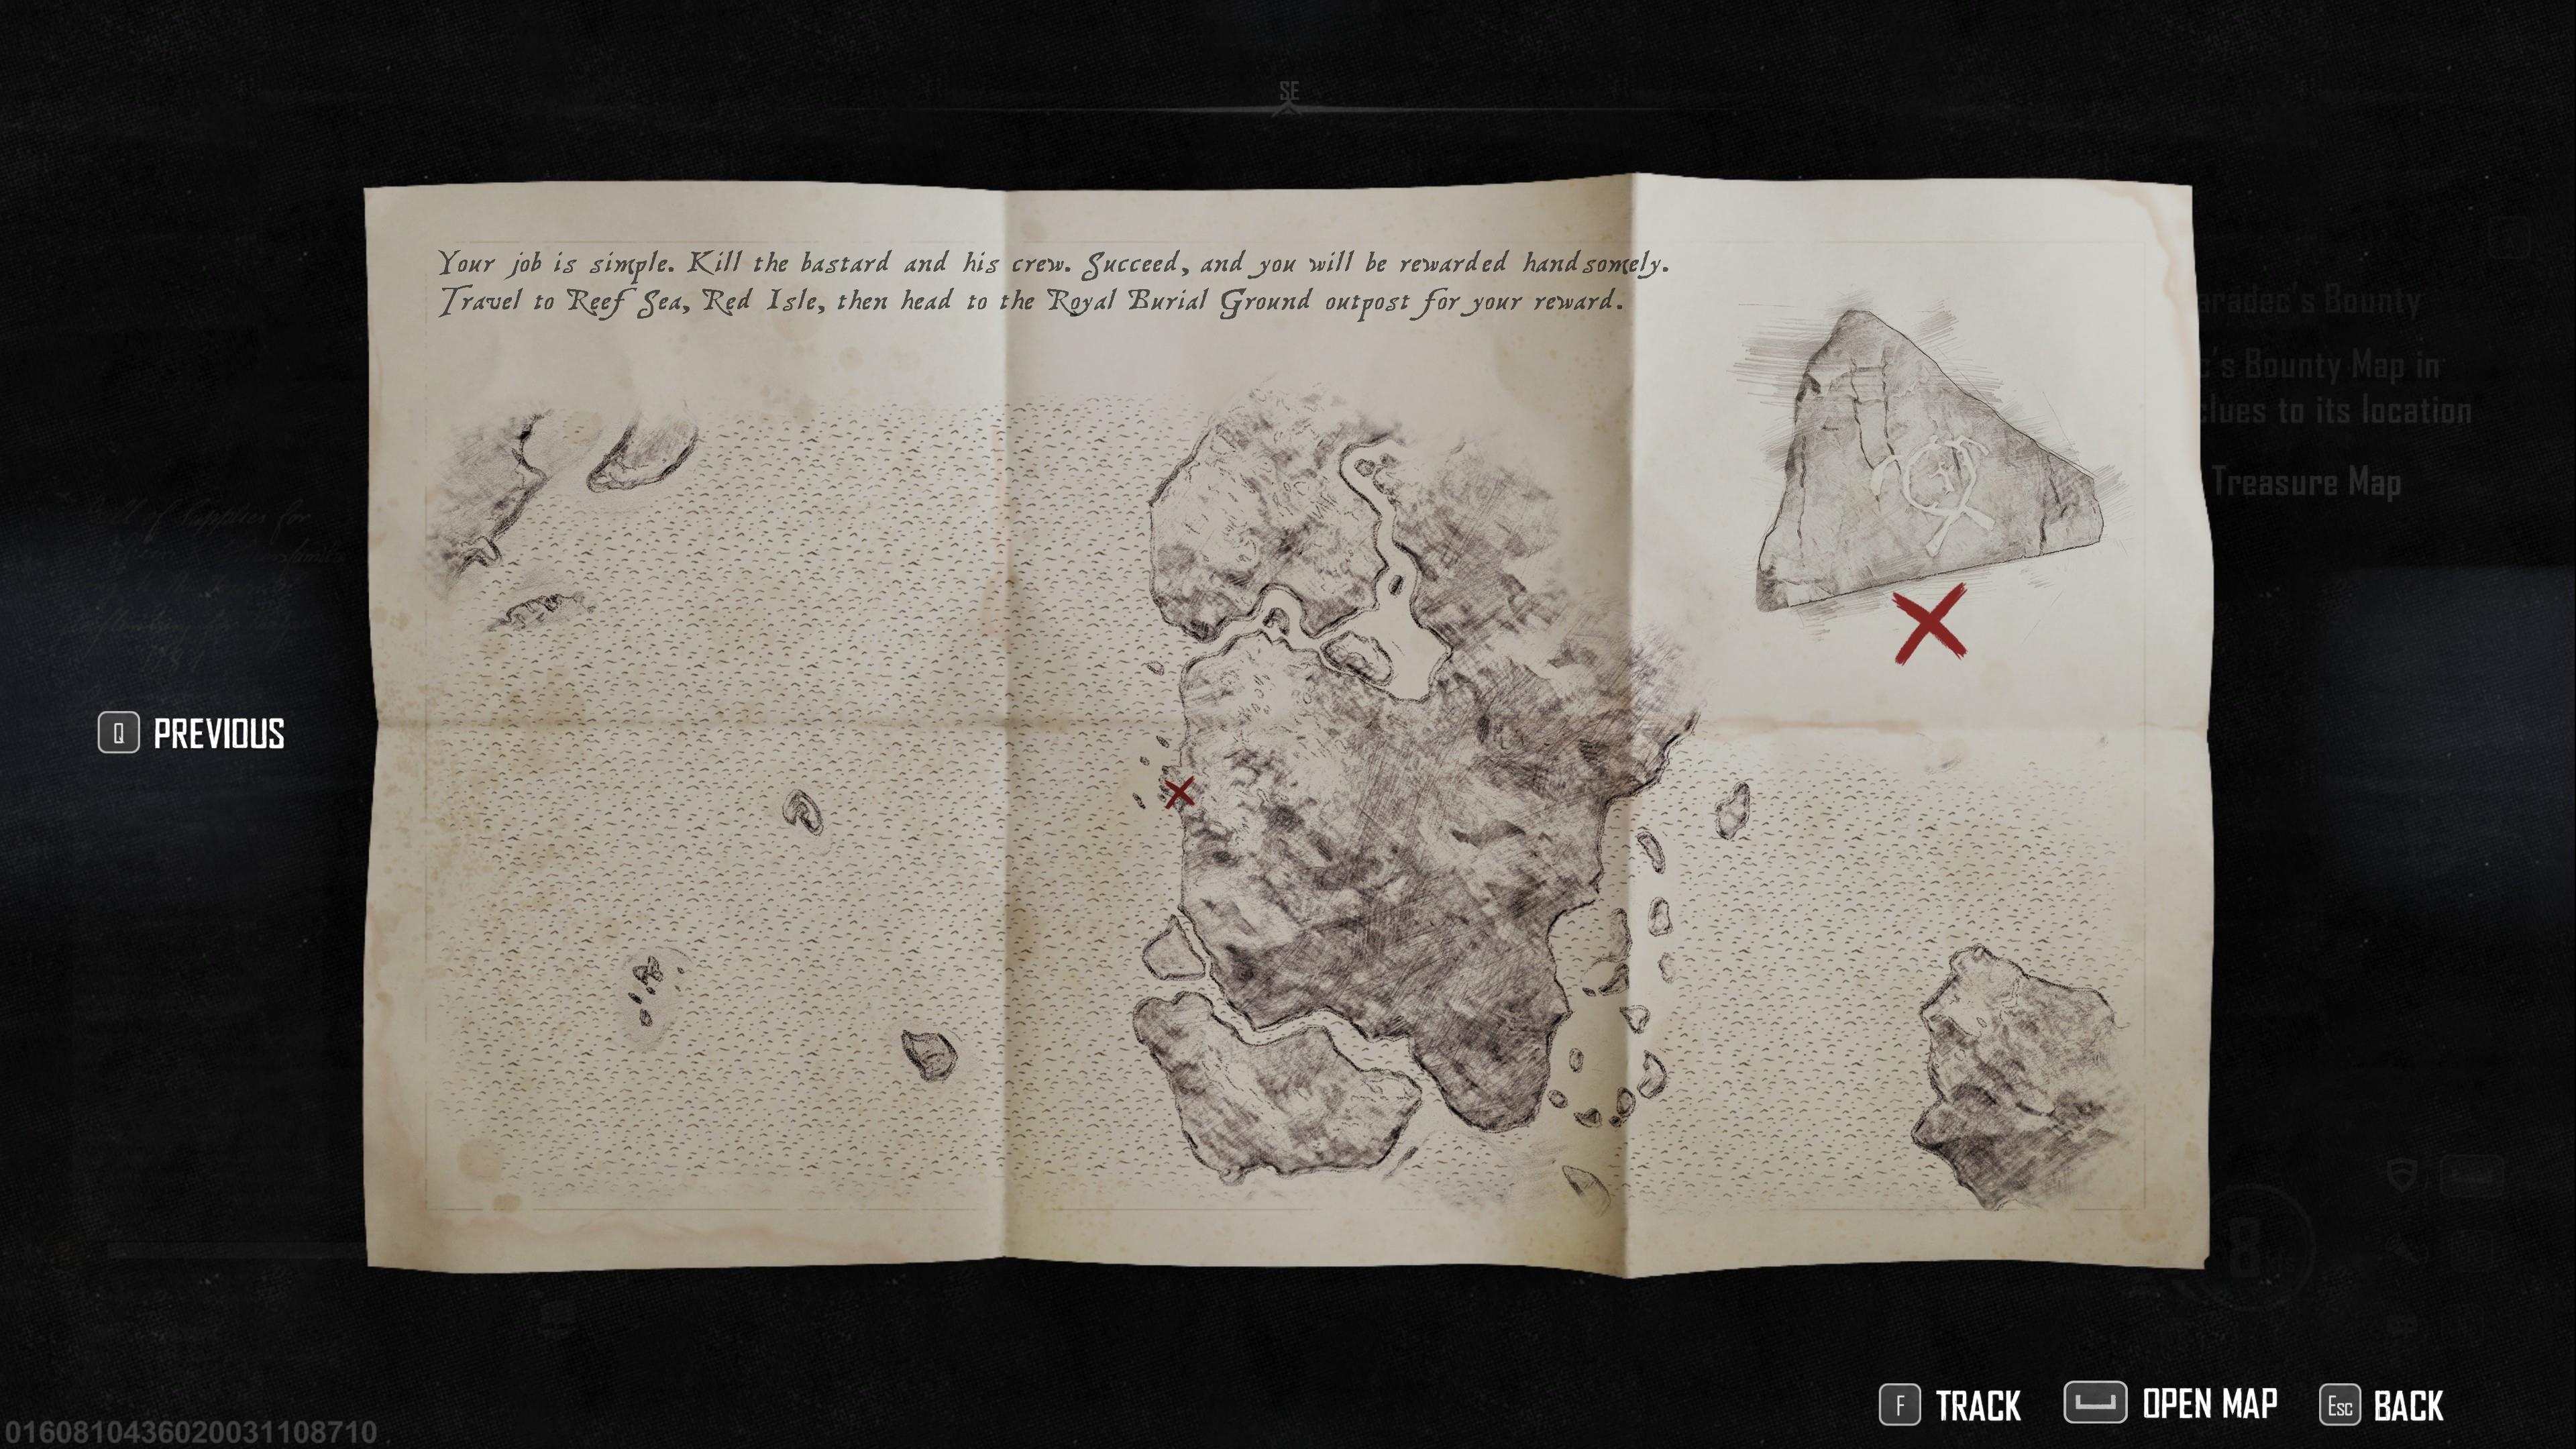 Skull and Bones: tips and tricks for surviving on the open sea